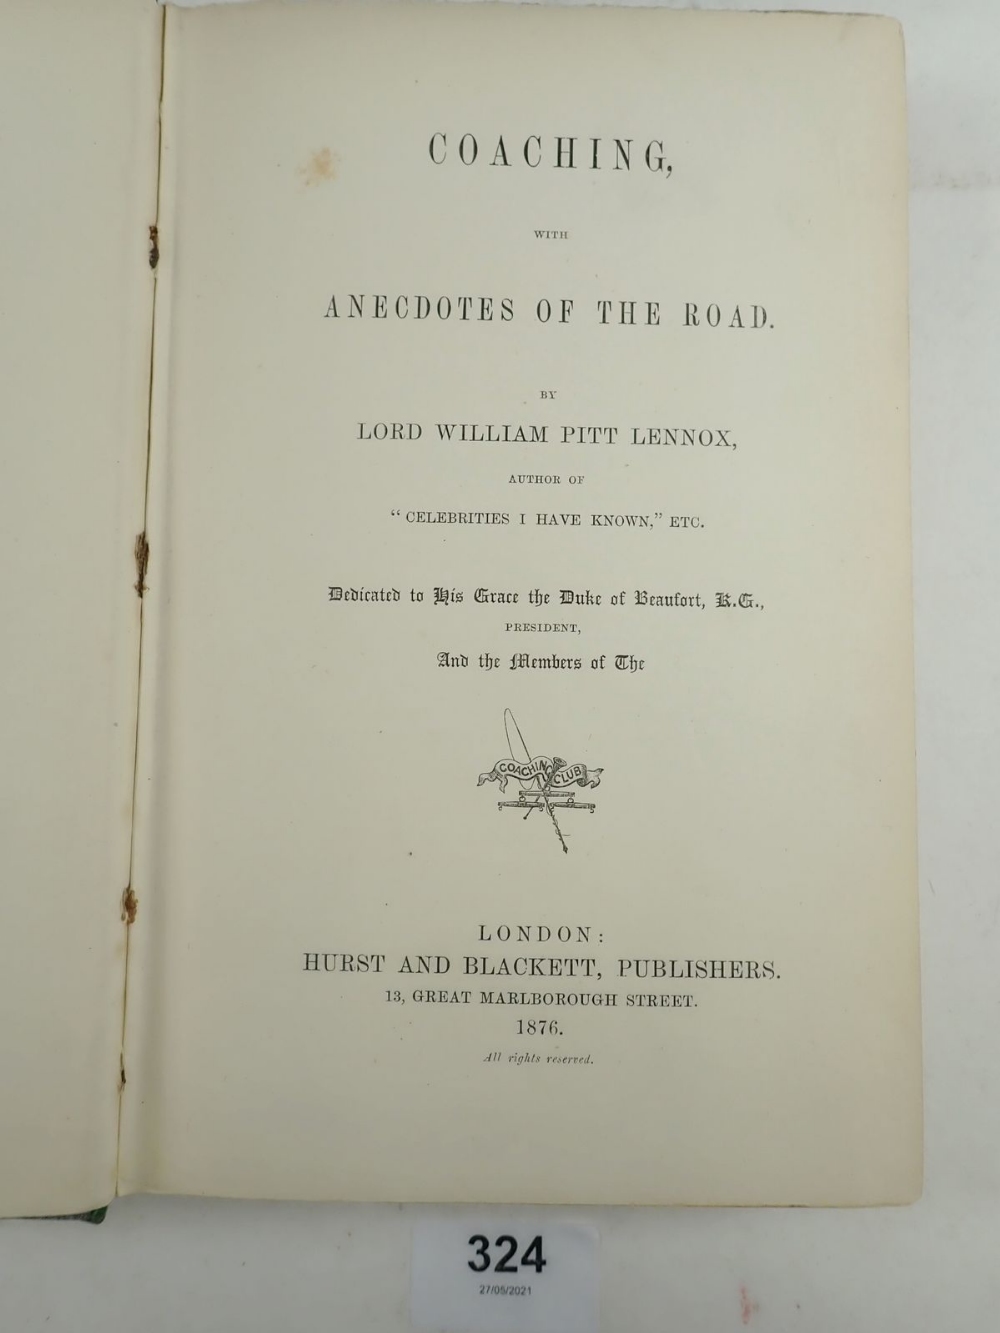 Coaching with Anecdotes of The Road by Lord William Pitt Lennox, published by Hurst & Blackett 1876 - Image 3 of 3